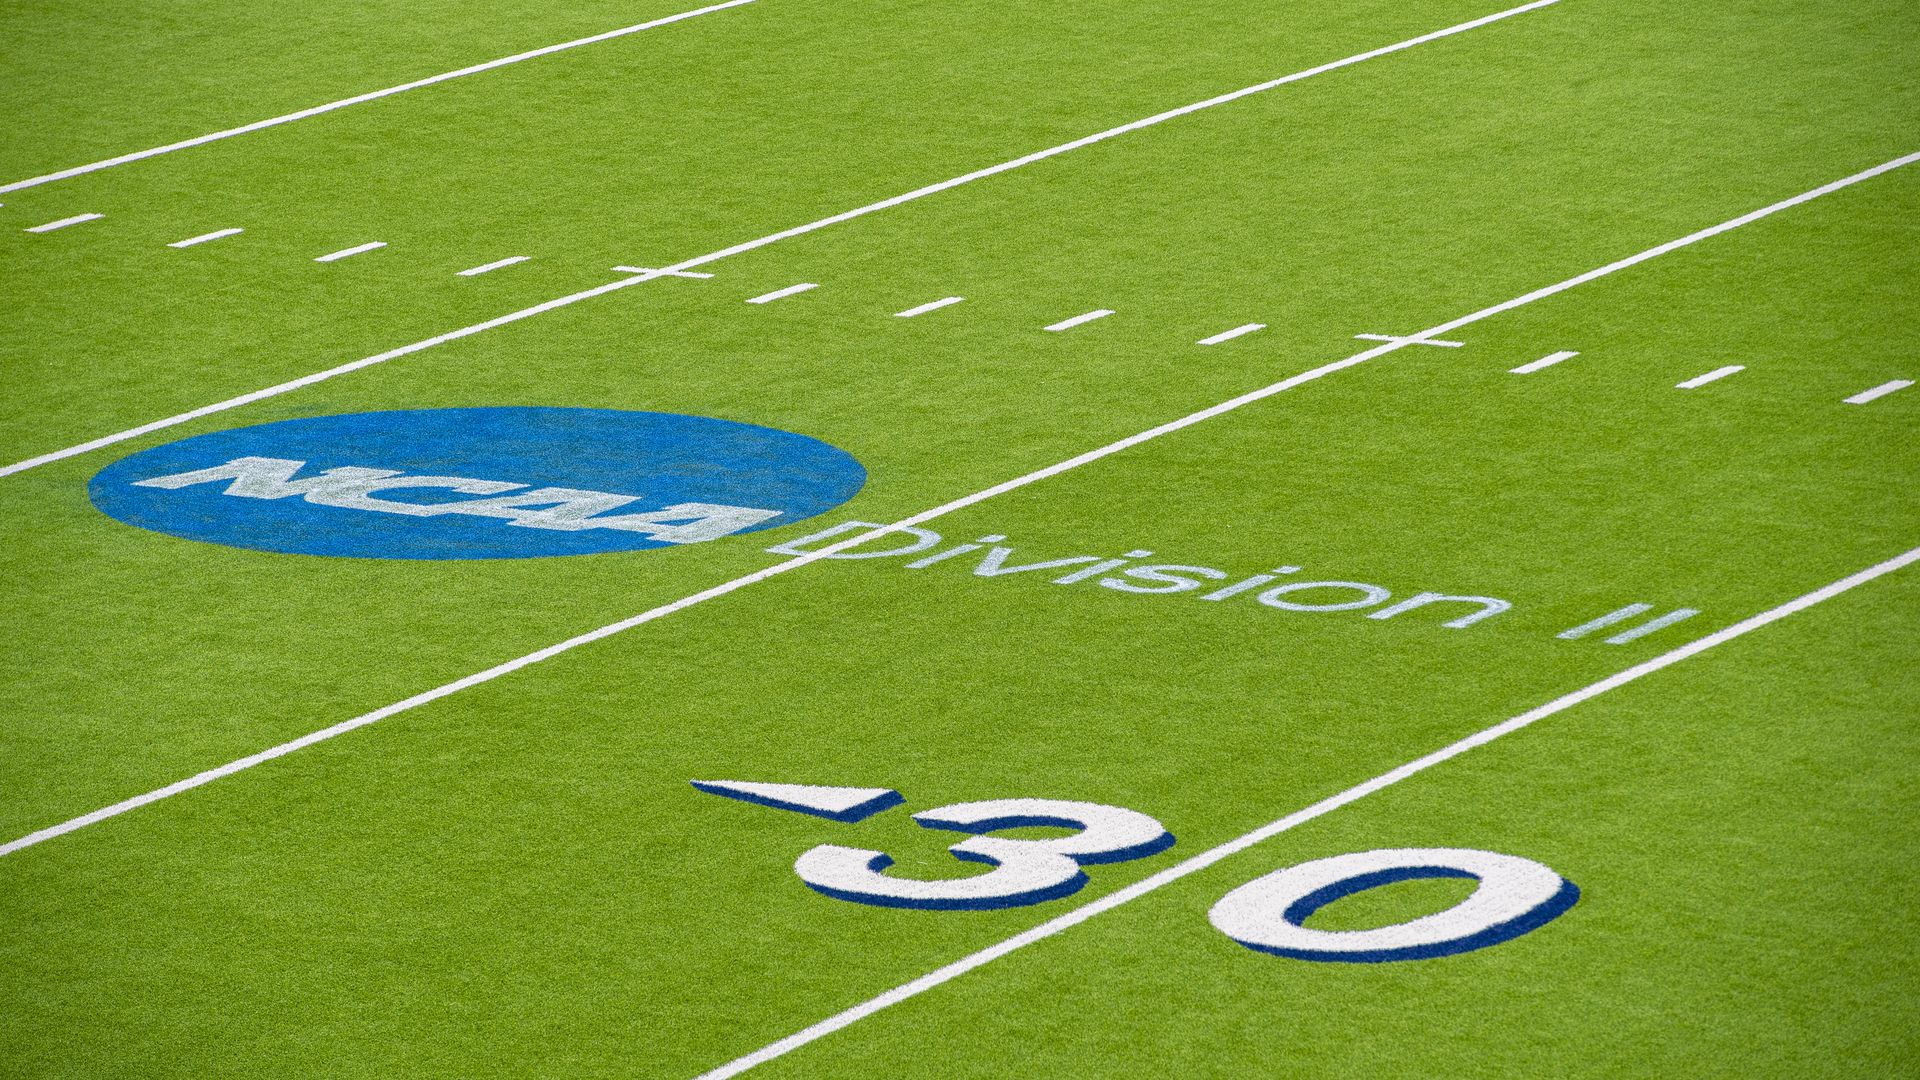 The NCAA Division II logo on a football field by the 30-yard line